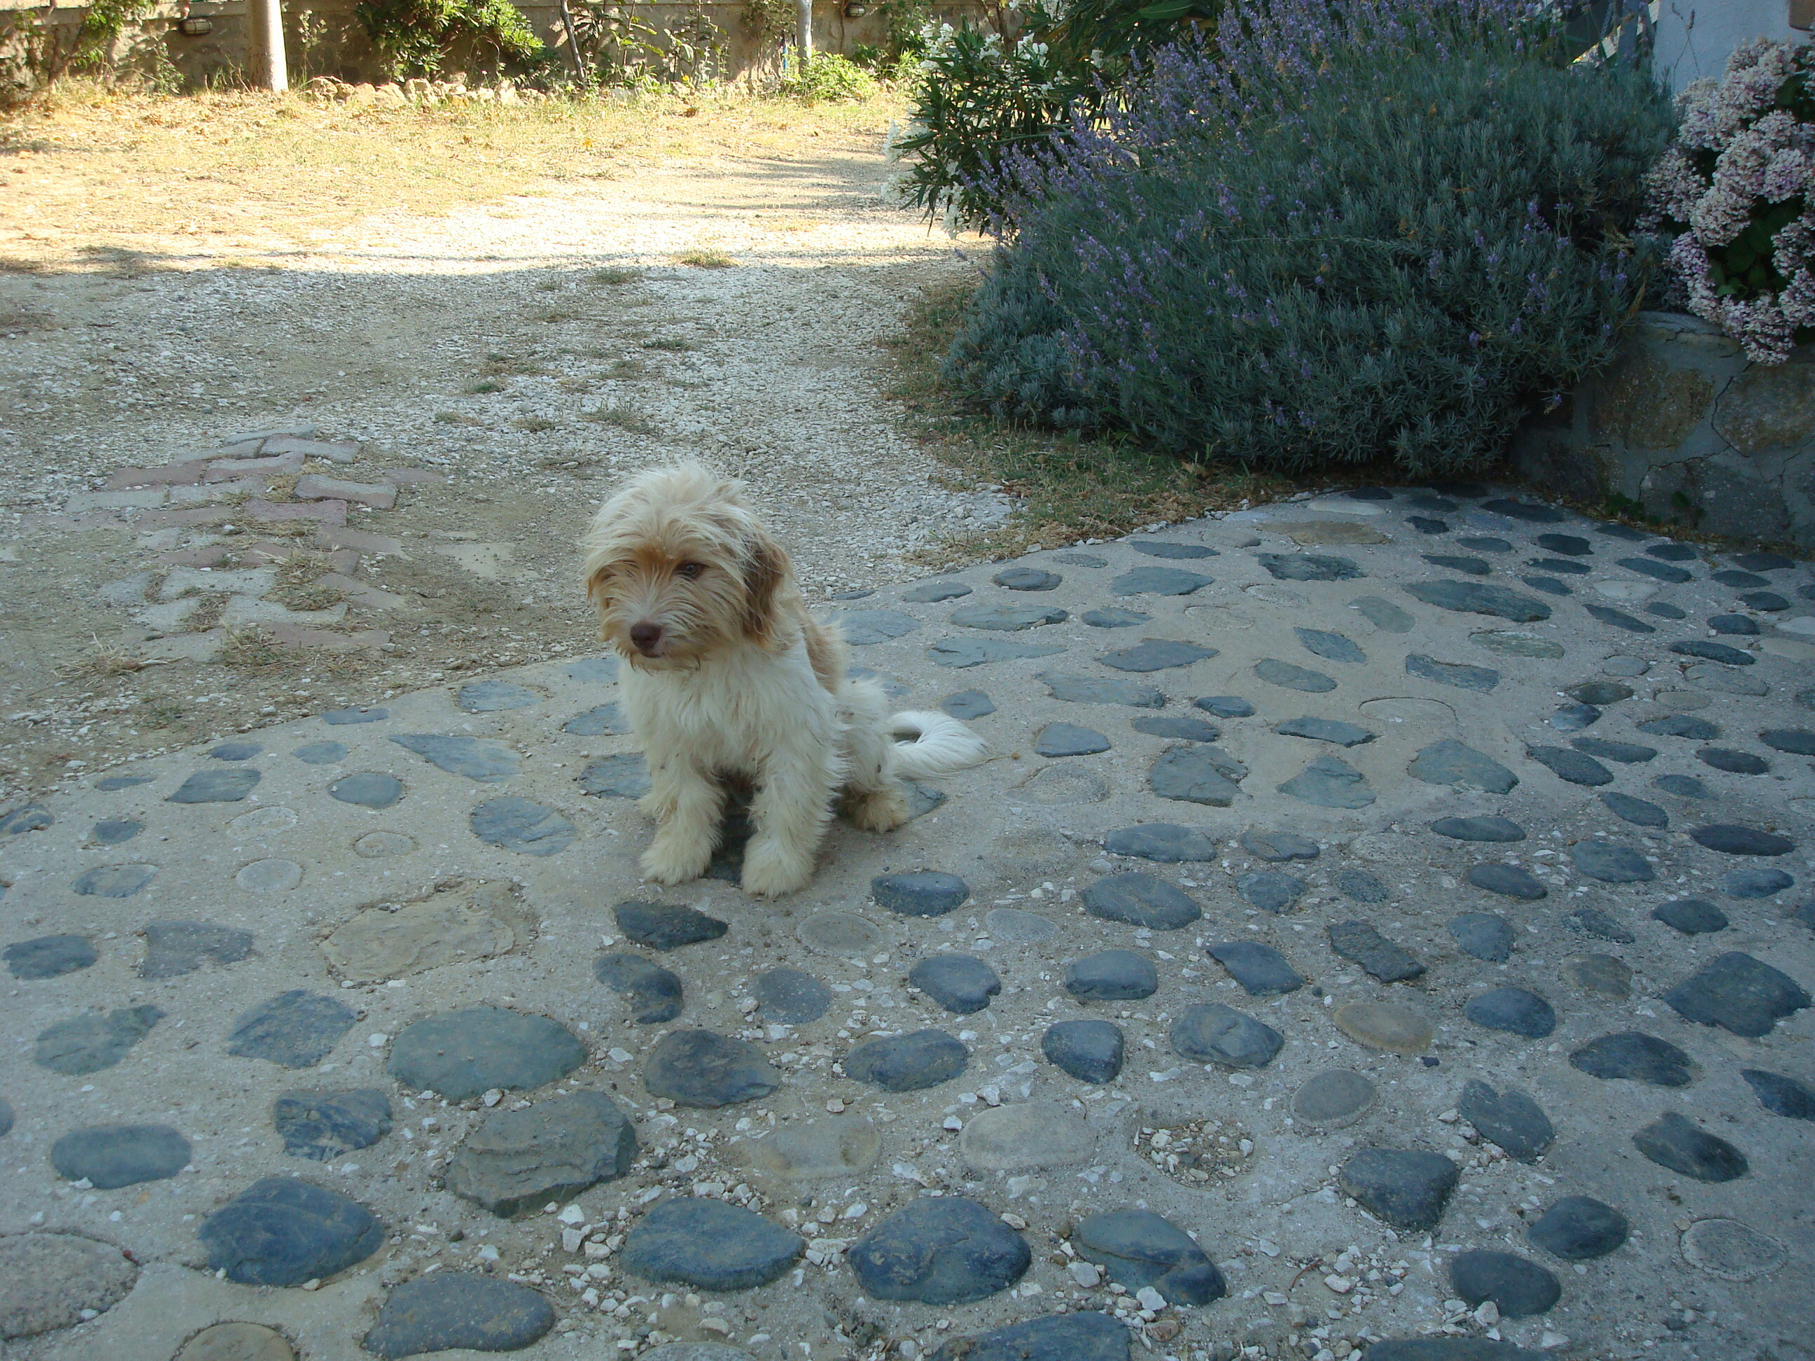 Our intrepid guard dog, Hector.